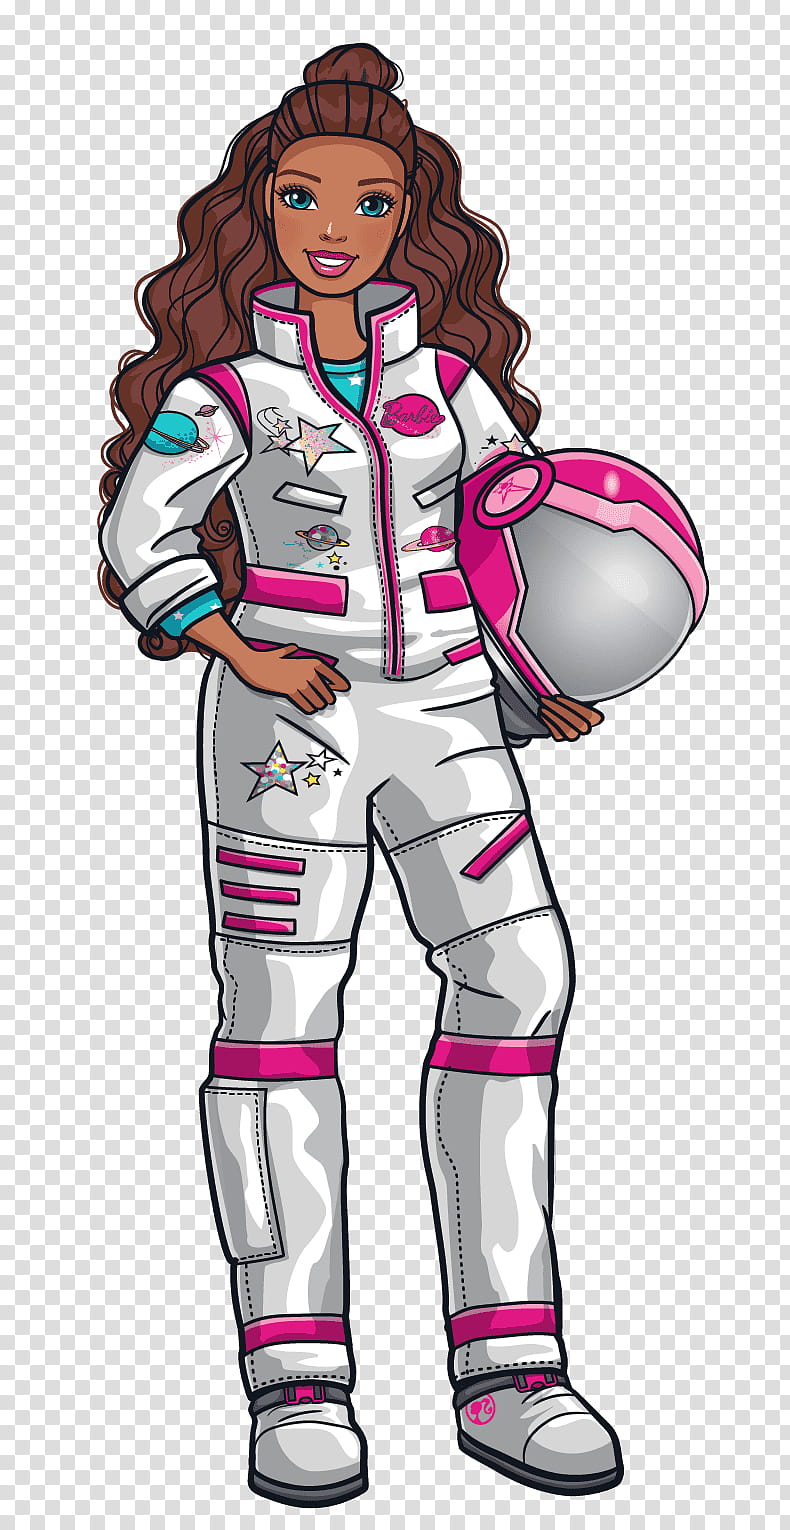 Astronaut, Costume, Game, Tynker, Character, Project, Learning, Cartoon transparent background PNG clipart